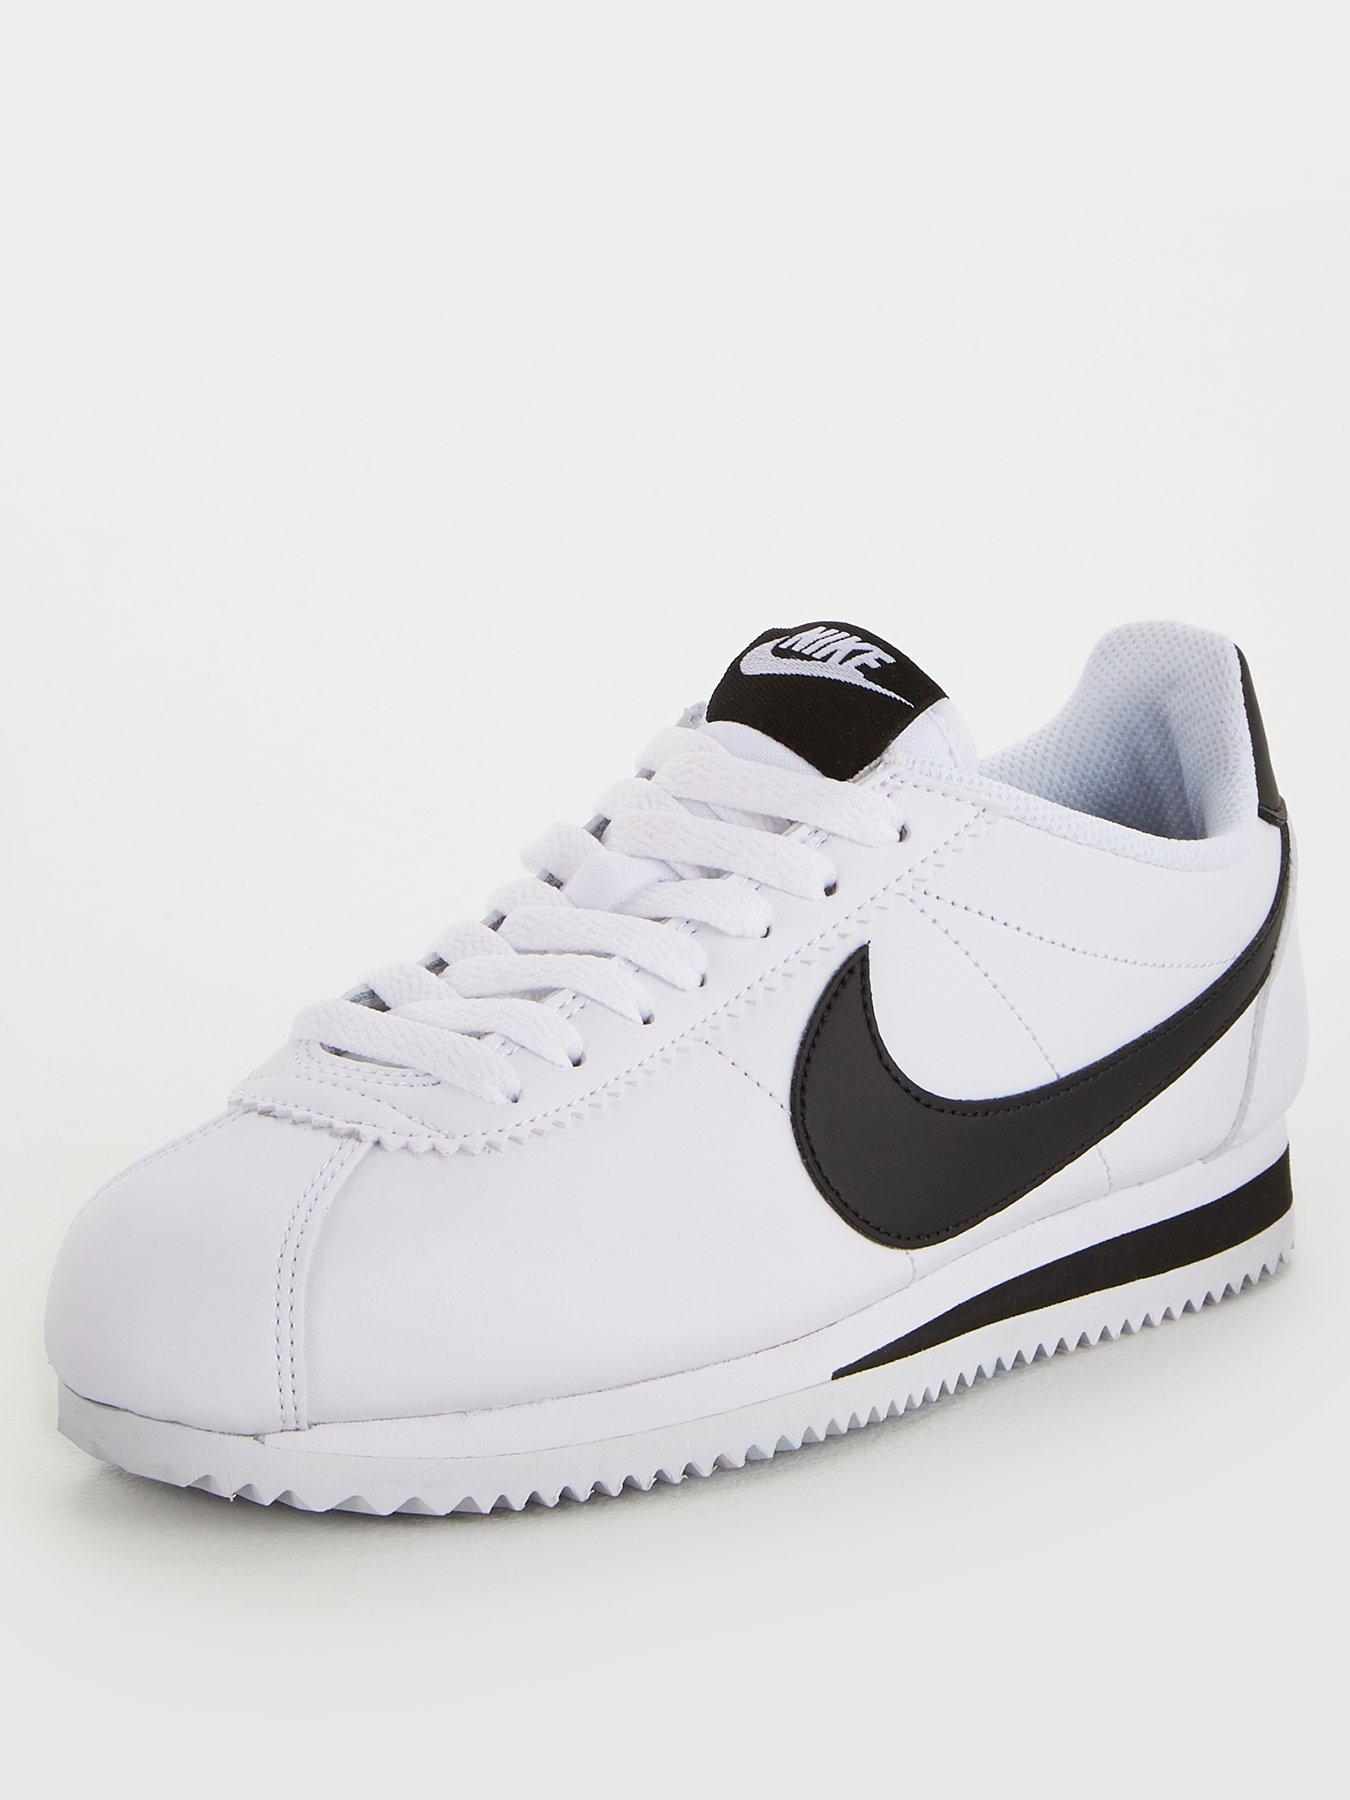 nike white leather trainers